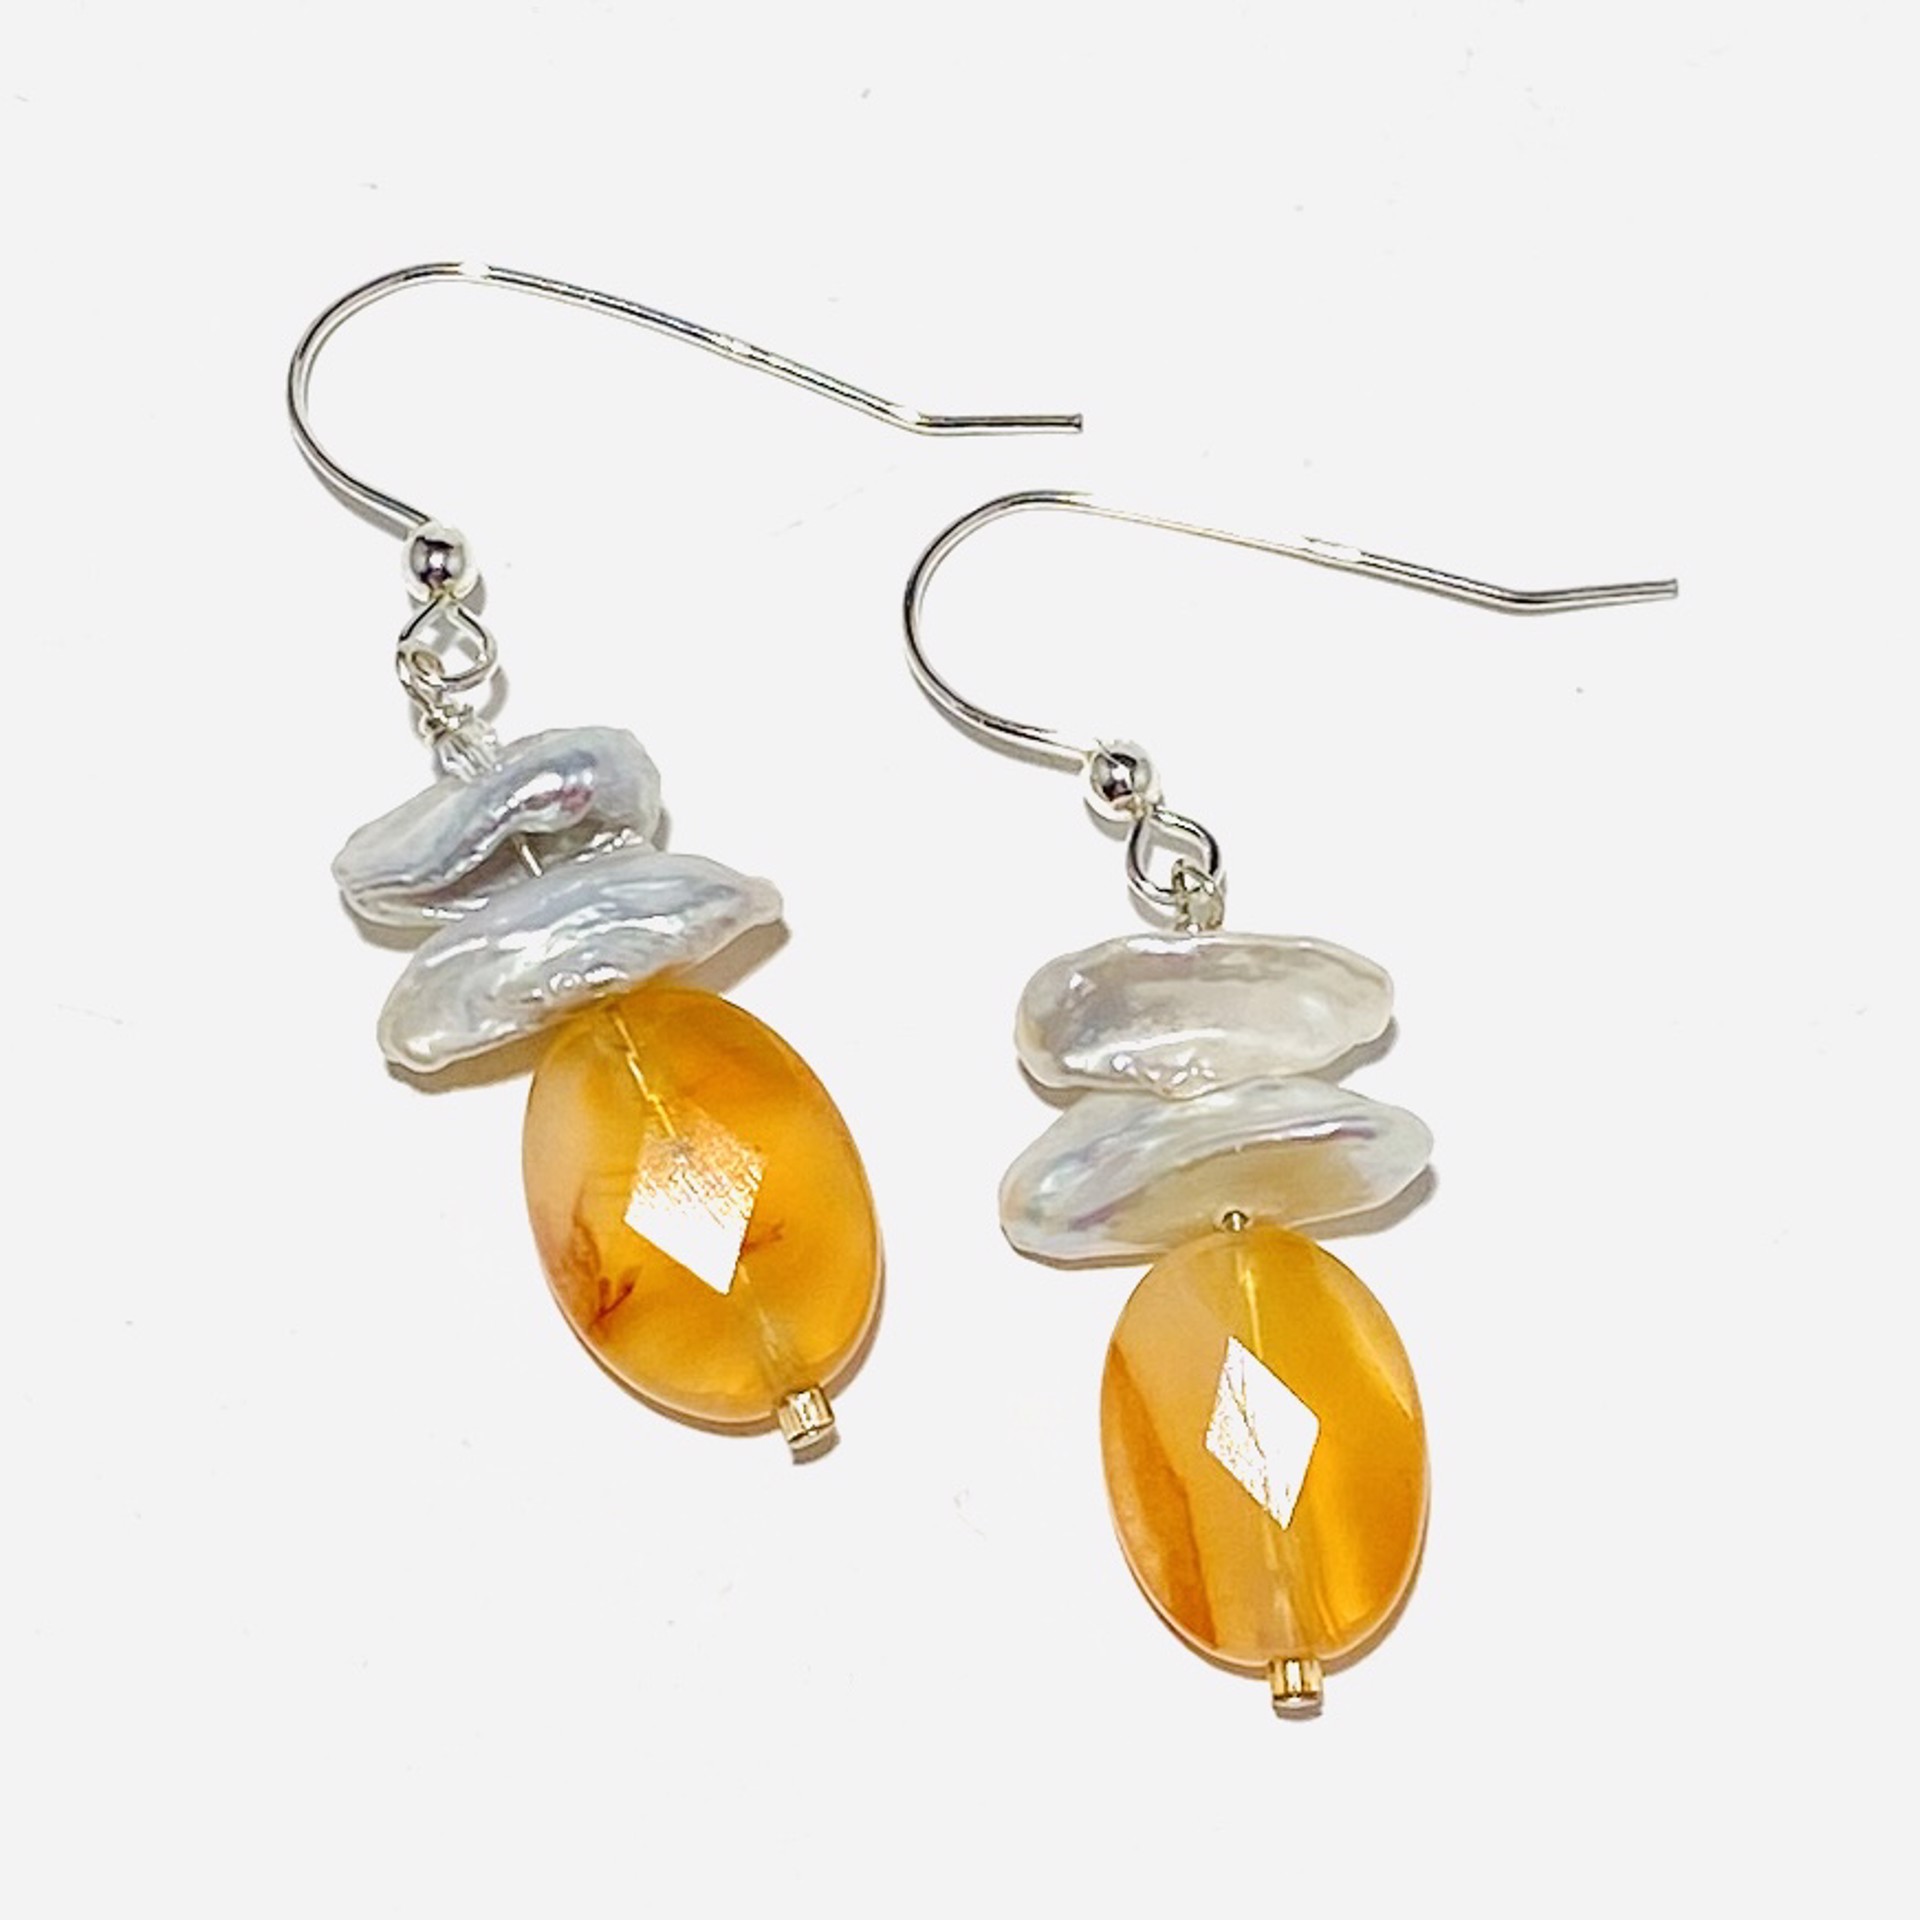 Faceted Carnelian, Pearl Earrings LR23-16 by Legare Riano